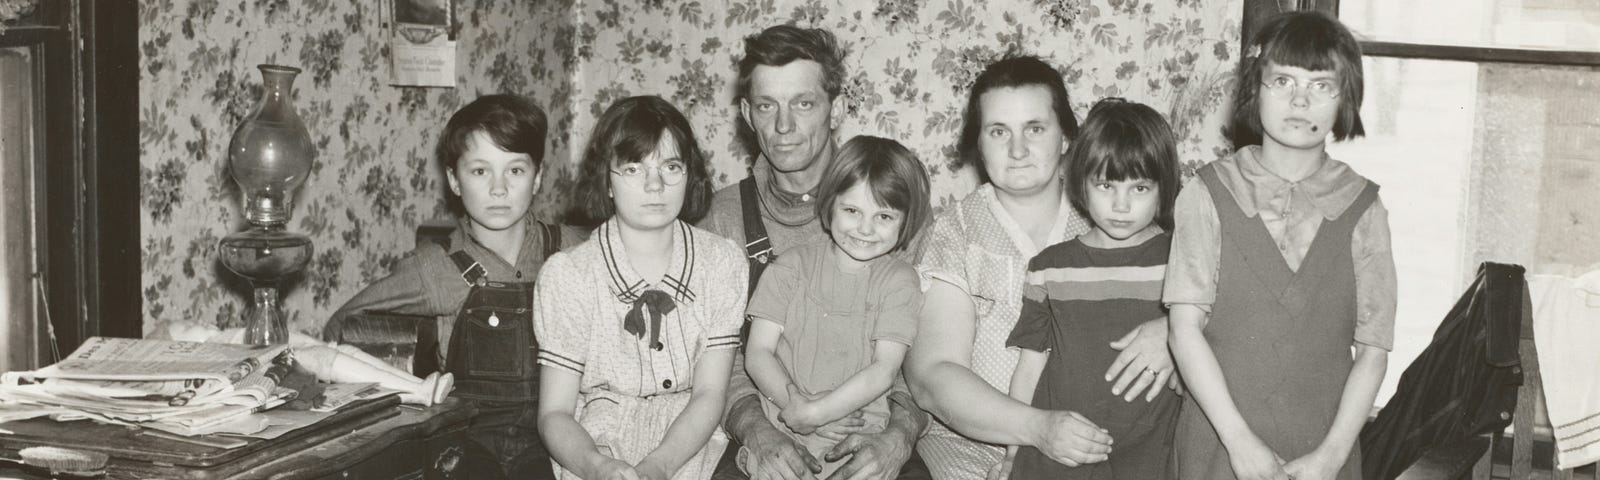 a husband and wife with five children, a black and white photo from perhaps the 1950s